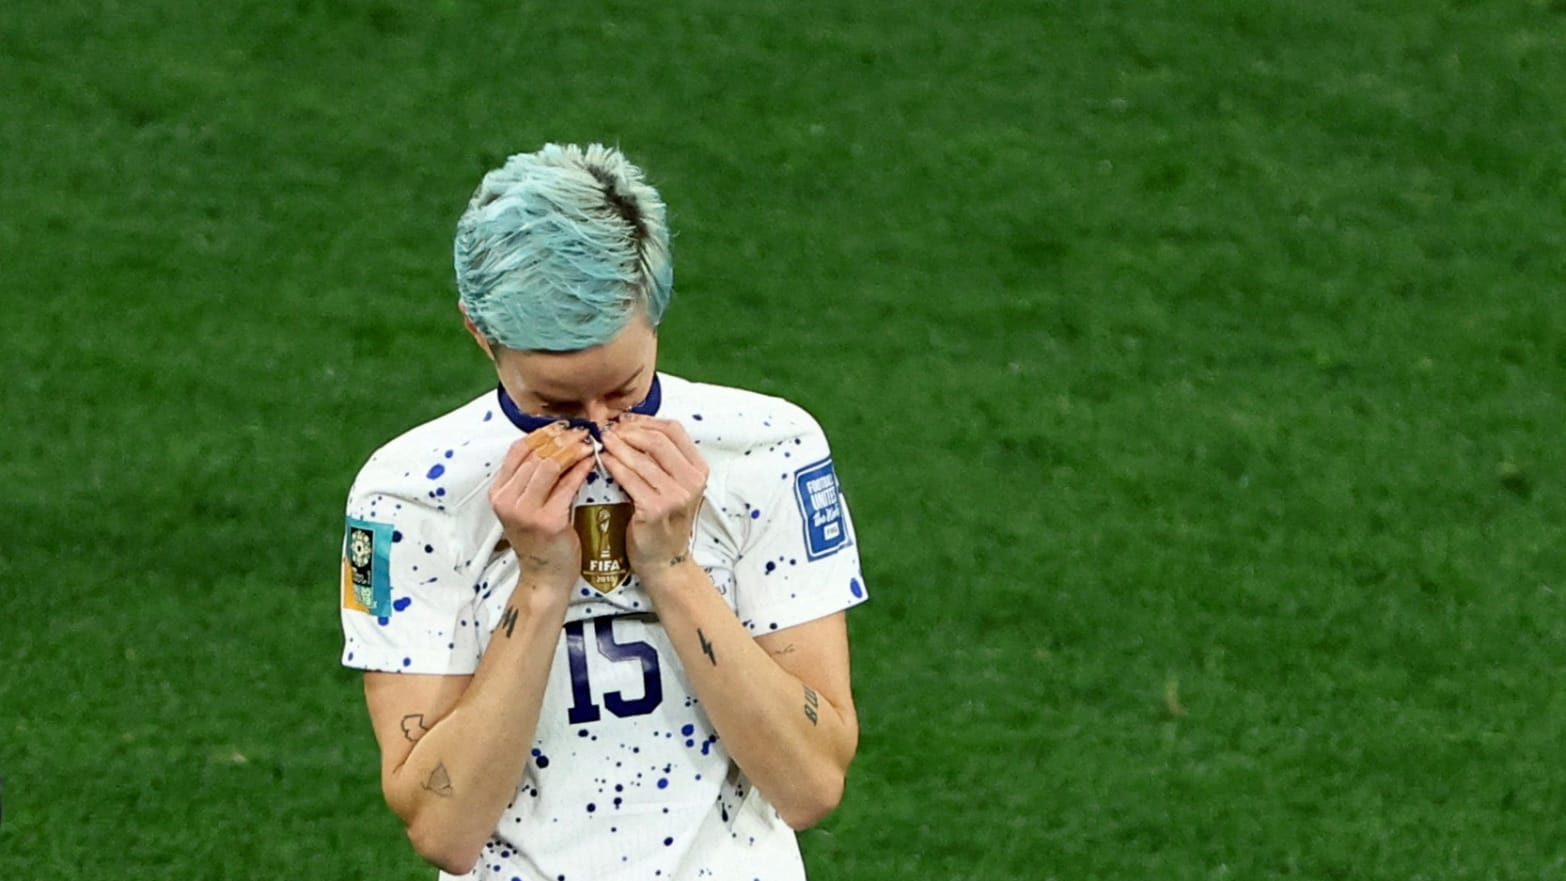 WATCH: U.S. Women's Soccer Team Eliminated From World Cup by Sweden